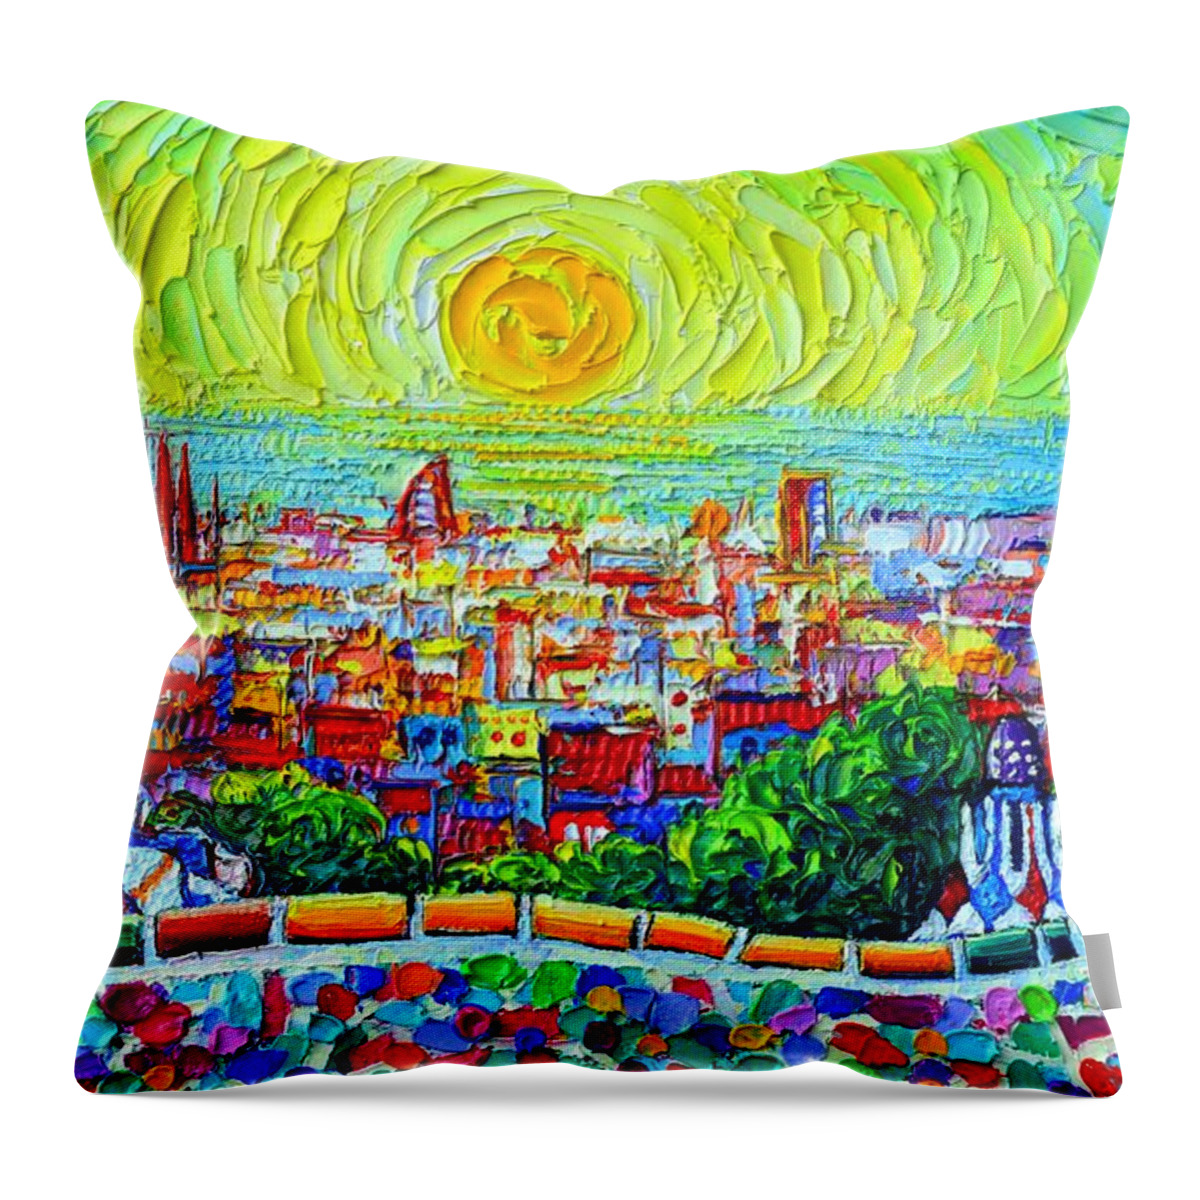 Barcelona Throw Pillow featuring the painting BARCELONA PARK GUELL SUNRISE textural impasto abstract city knife oil painting by Ana Maria Edulescu by Ana Maria Edulescu